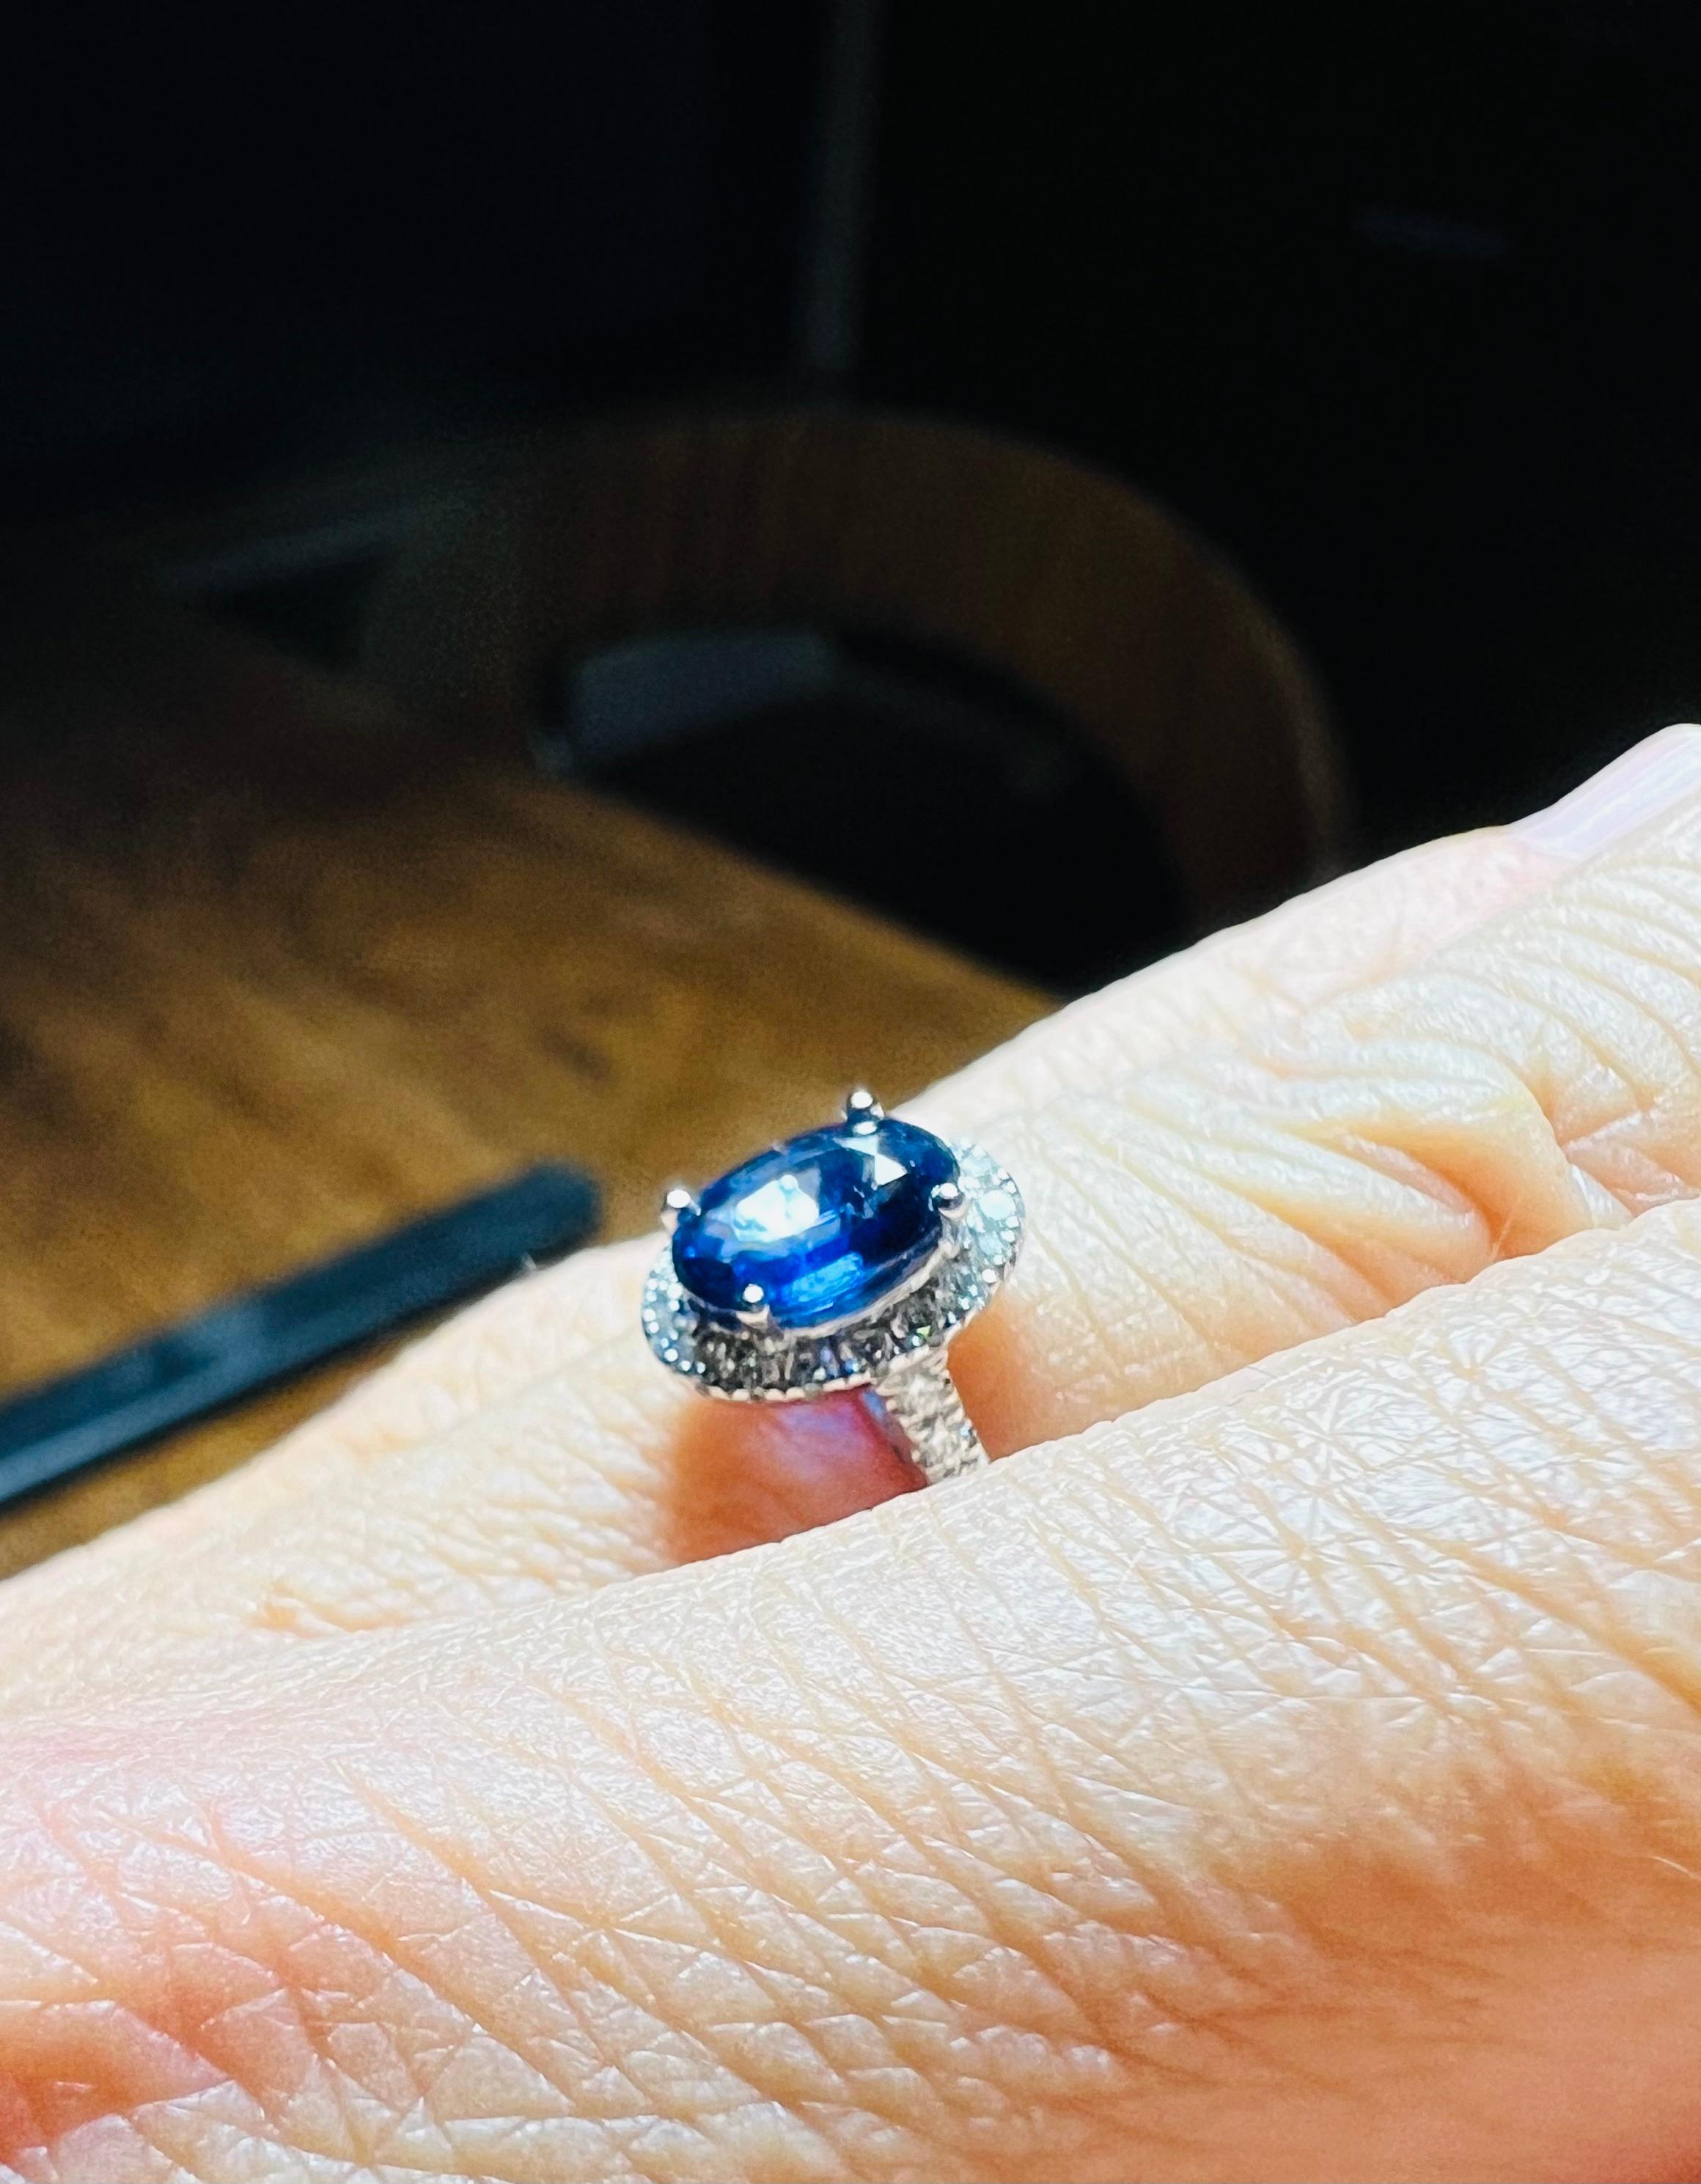 Ring Set With A Sapphire Surrounded By Diamonds, 18 Carat Gold 8